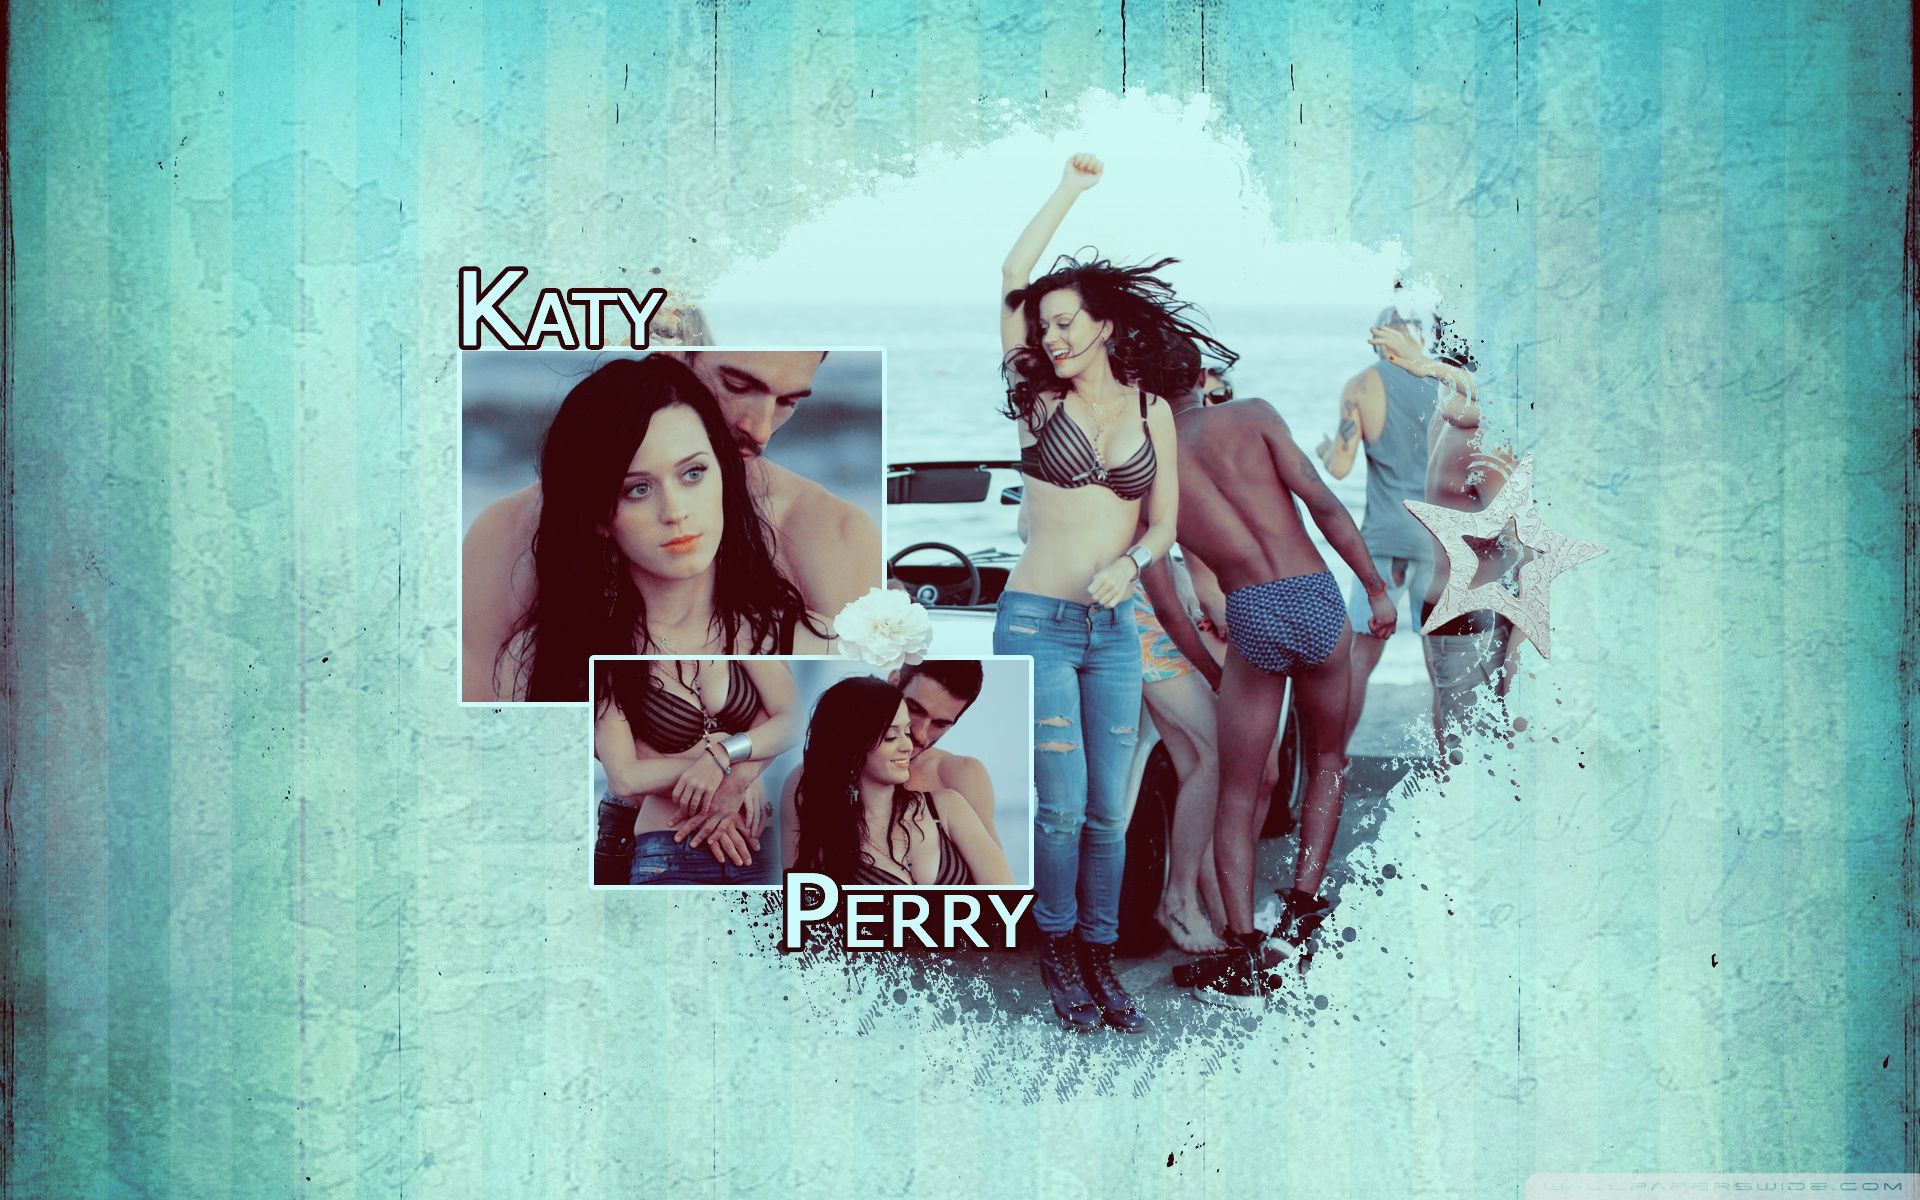 Katy Perry Dream Ultra HD .wallpaperwide.com